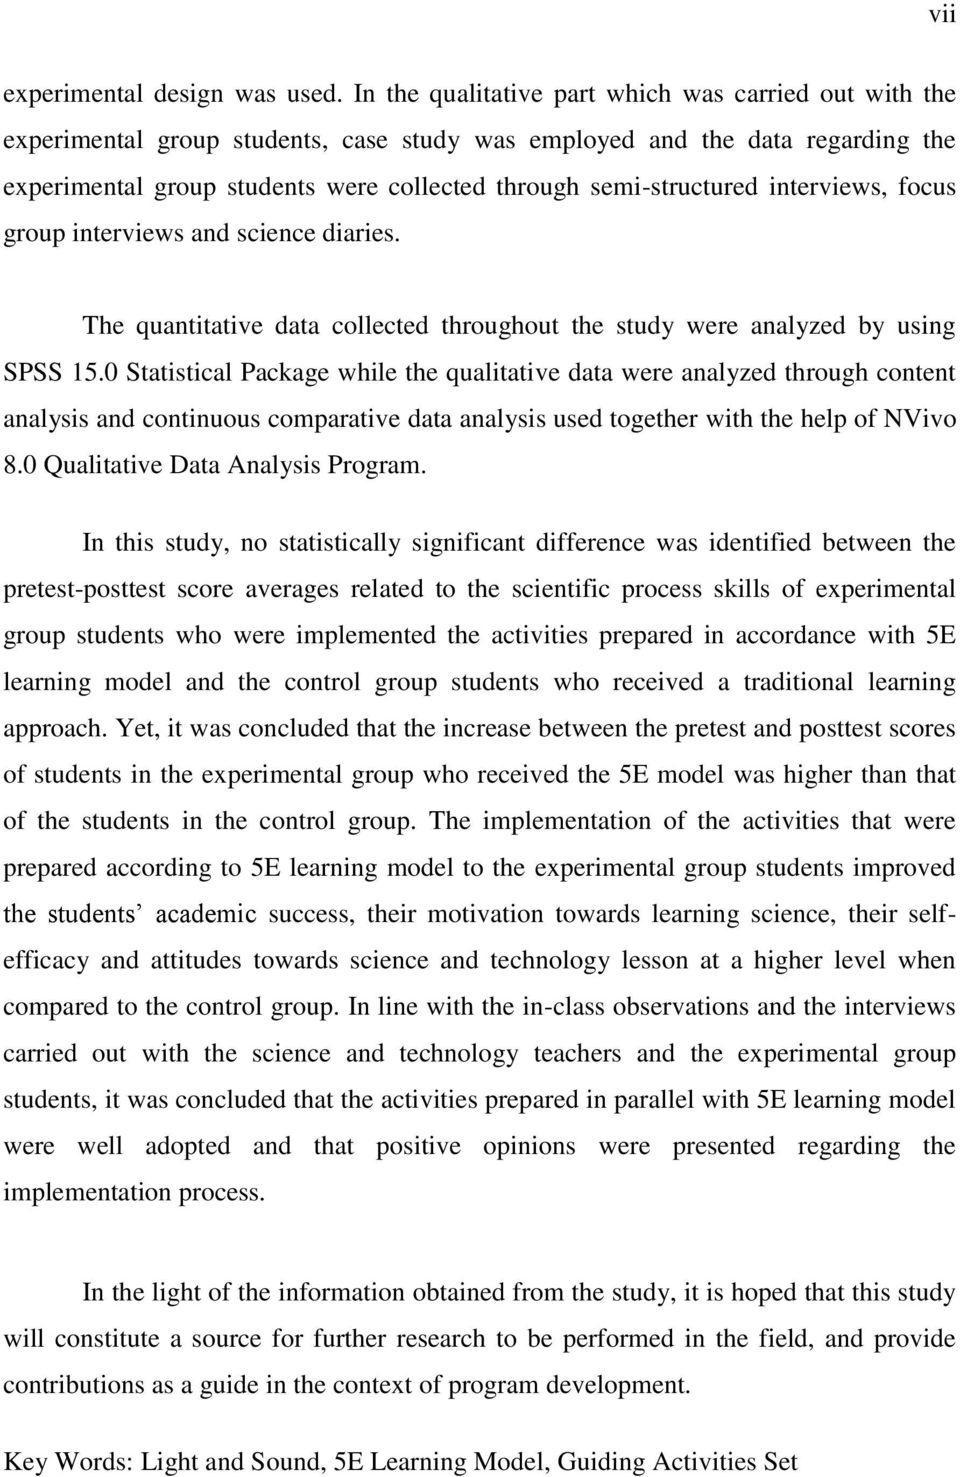 semi-structured interviews, focus group interviews and science diaries. The quantitative data collected throughout the study were analyzed by using SPSS 15.